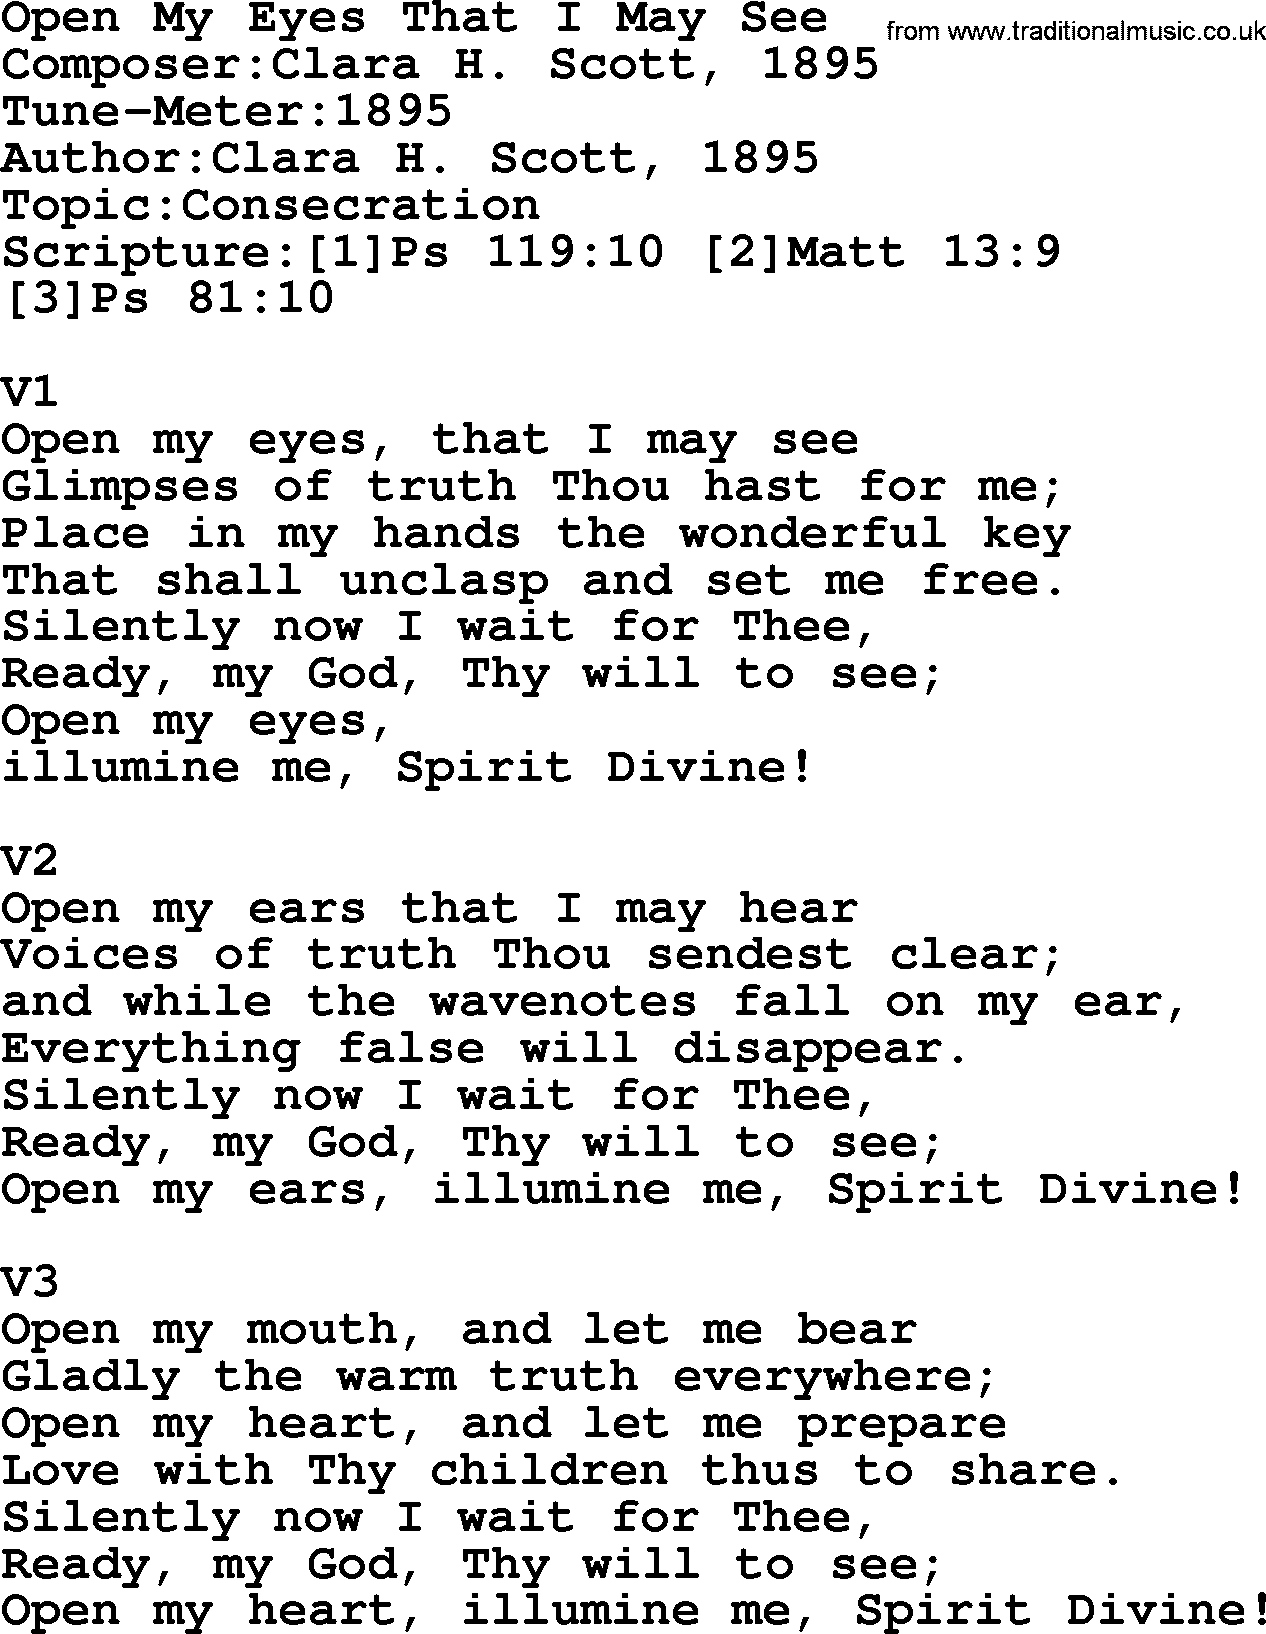 Adventist Hynms collection, Hymn: Open My Eyes That I May See, lyrics with PDF